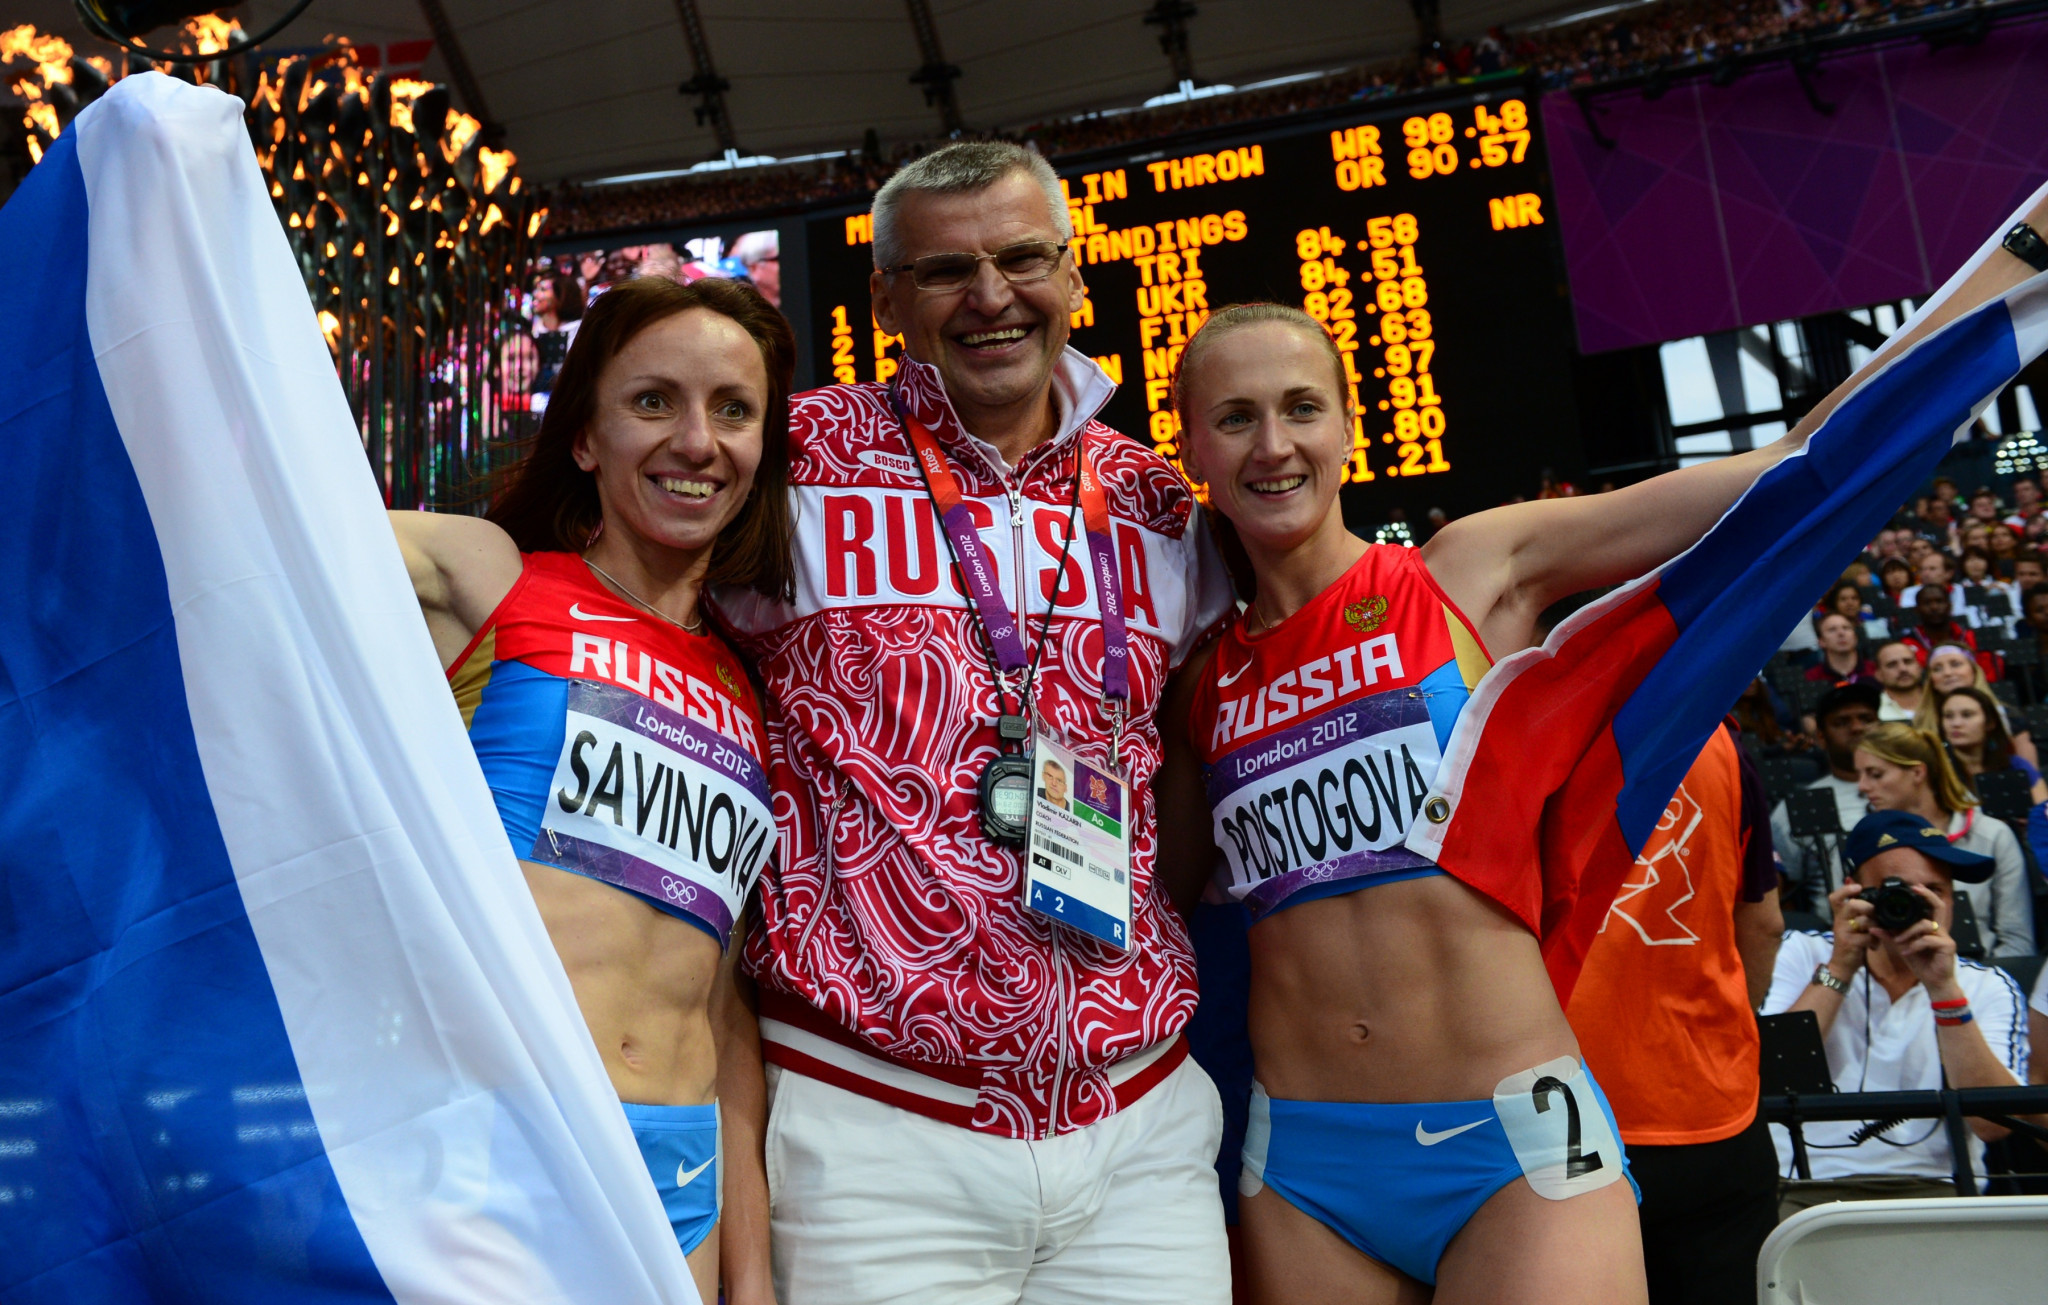 Russian athletics coach Vladimir Kazarin has admitted breaching his lifetime ban from the sport ©Getty Images